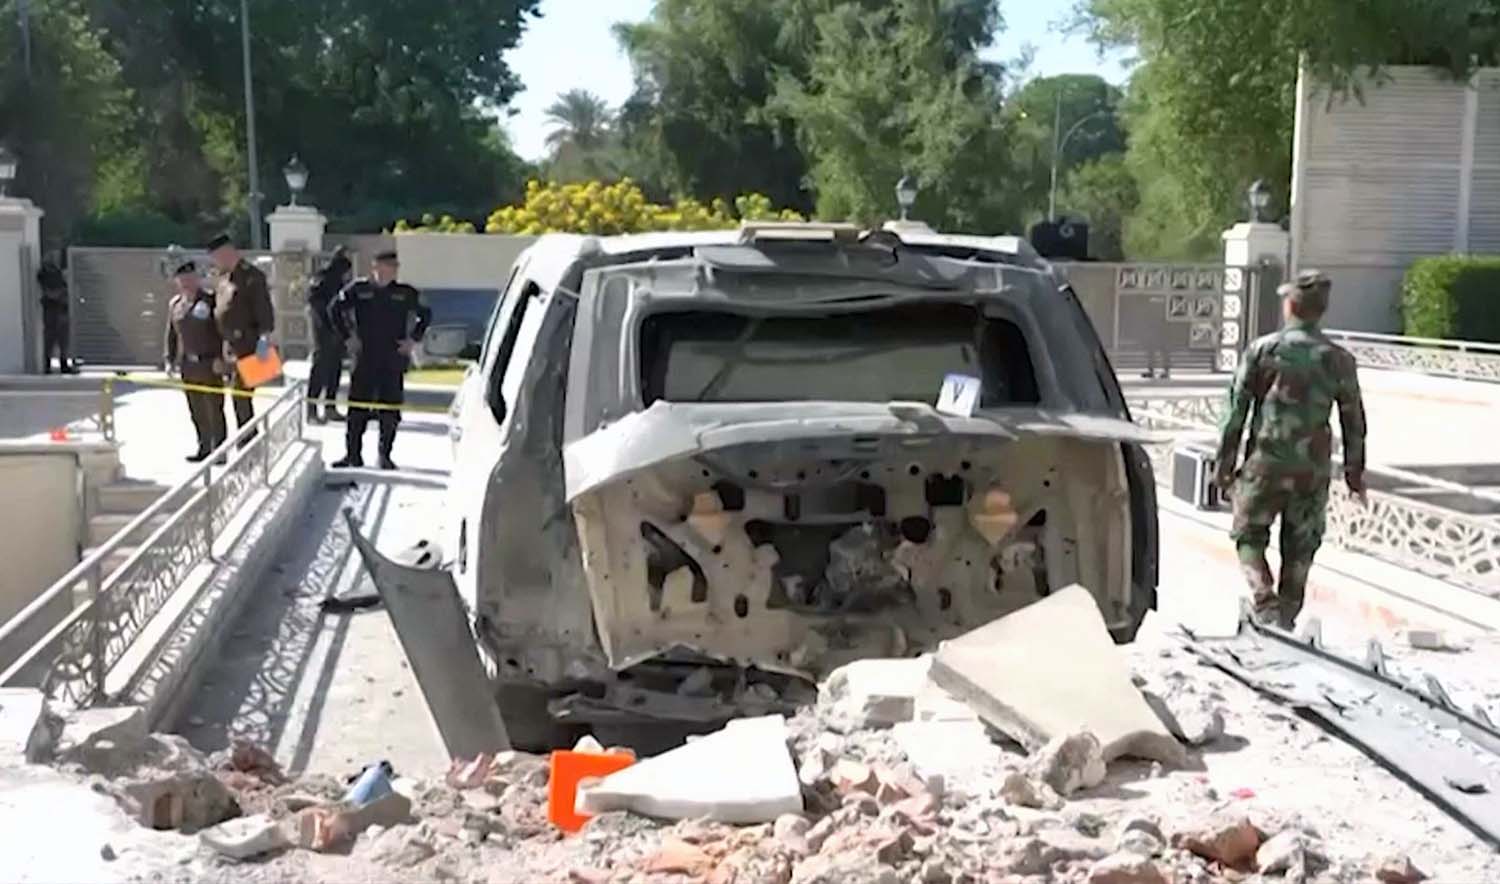 A damaged vehicle in the aftermath of a drone strike on Iraqi prime minister's residence